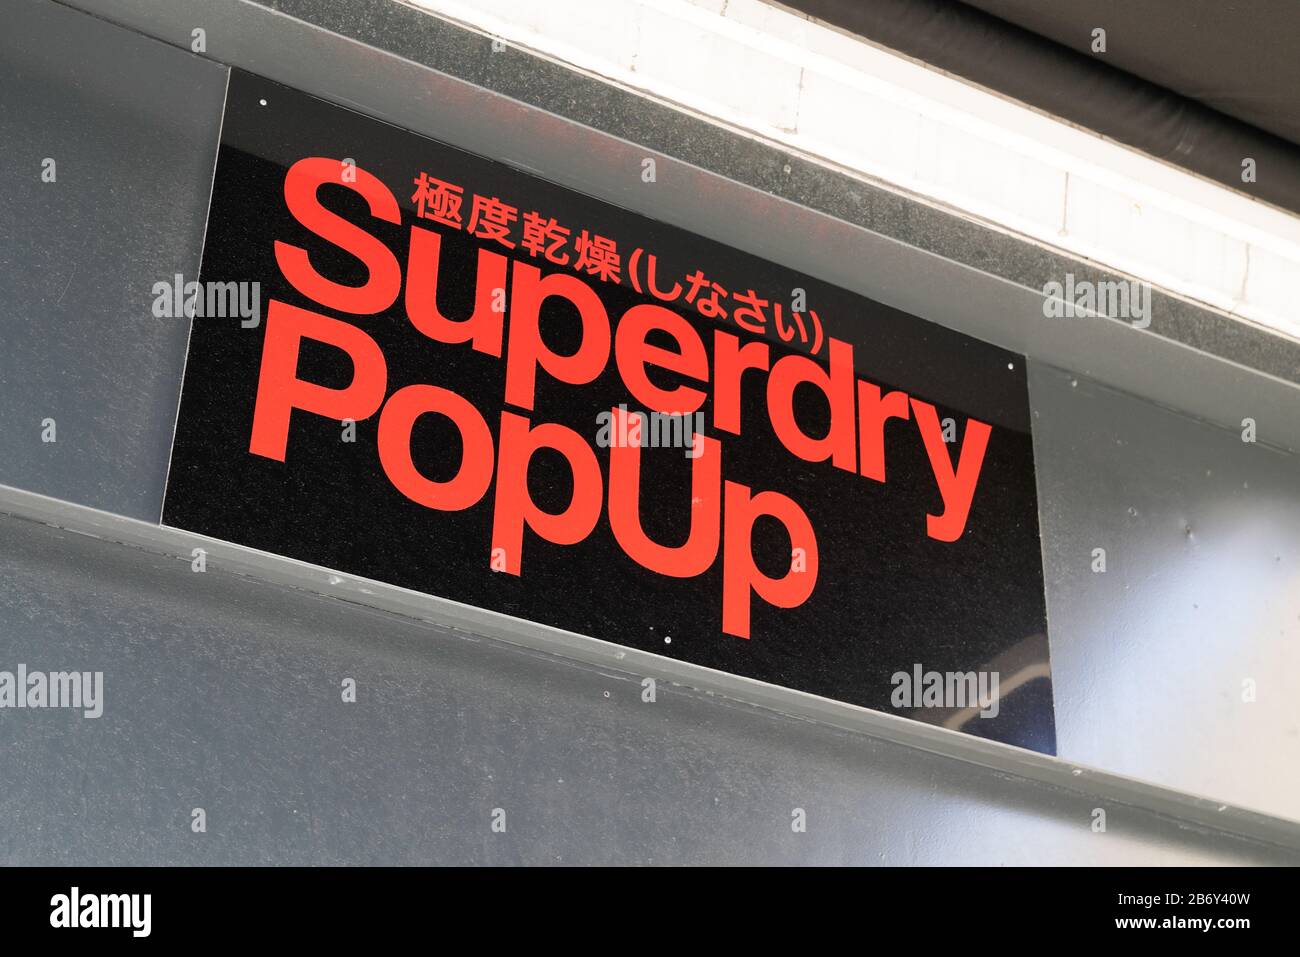 Bordeaux , Aquitaine / France - 02 15 2020 : Superdry popup store sign logo  British shop international branded clothing company Stock Photo - Alamy